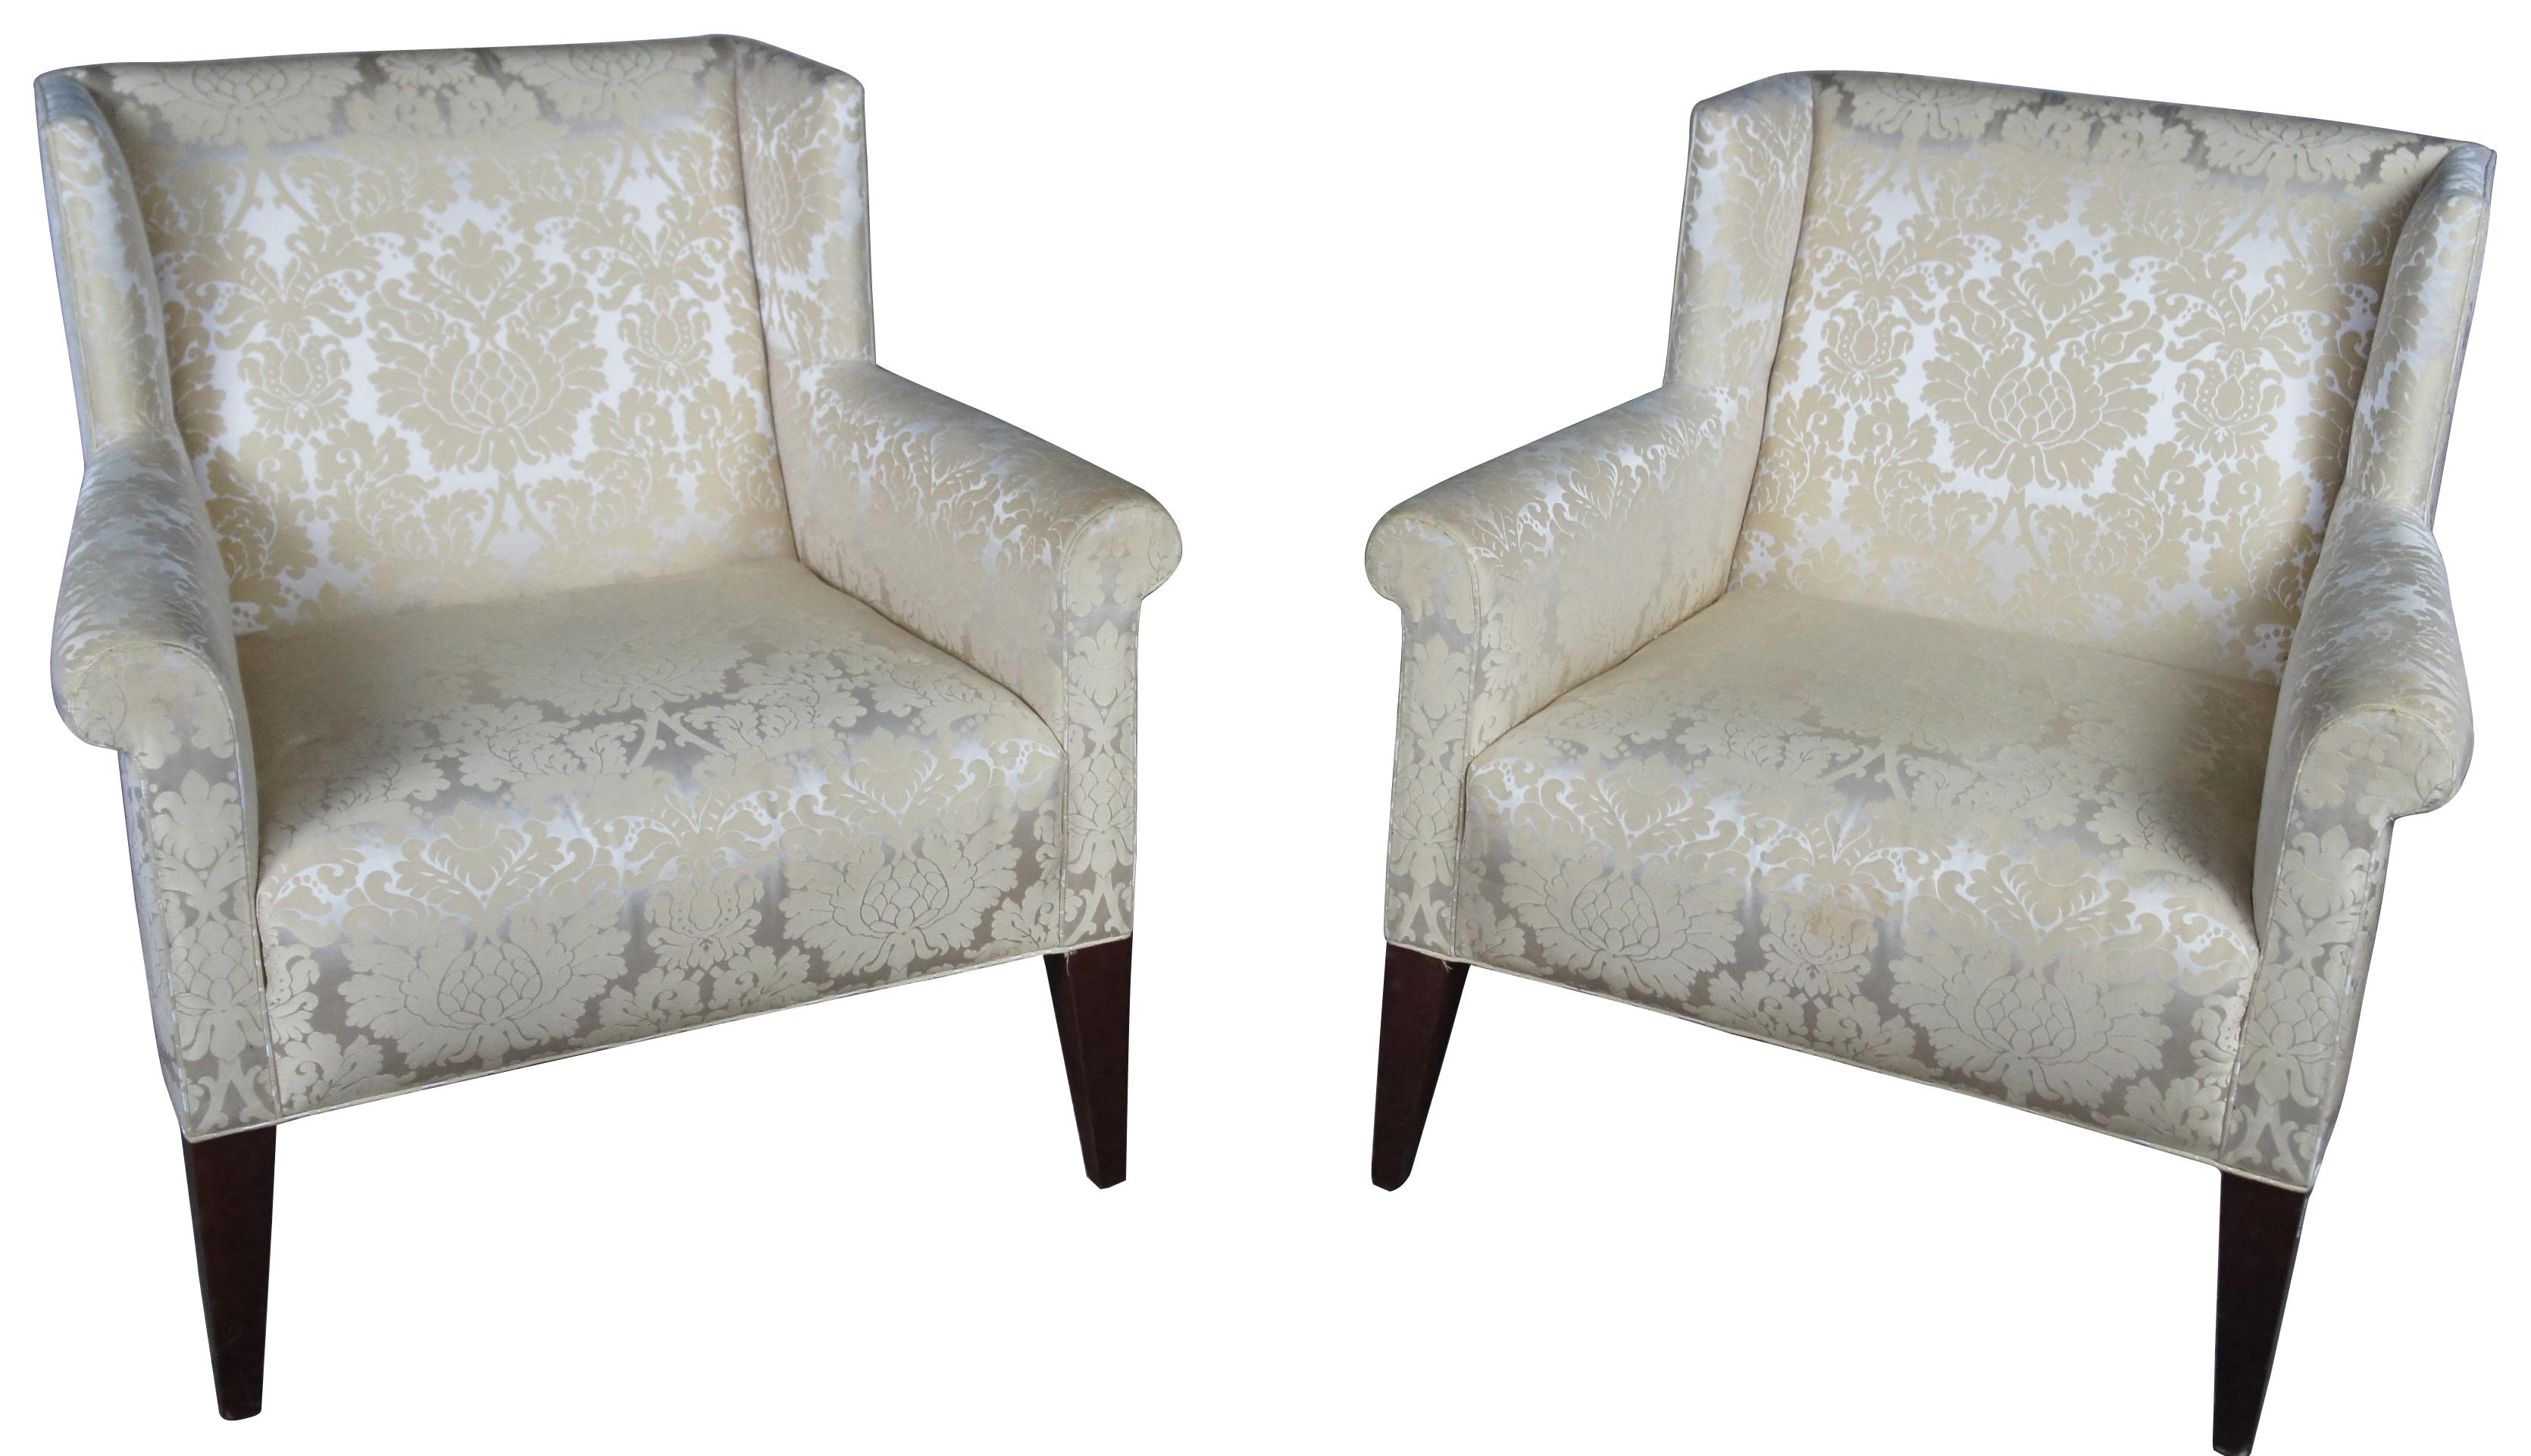 2 Baker Archetype wingback traditional armchairs mahogany Scalamandre fabric

Beautiful pair of Baker Furniture Archetype Collection wingback club arm chairs. Features bright scalamandre floral pattern fabric in champagne color. Rests upon tapered